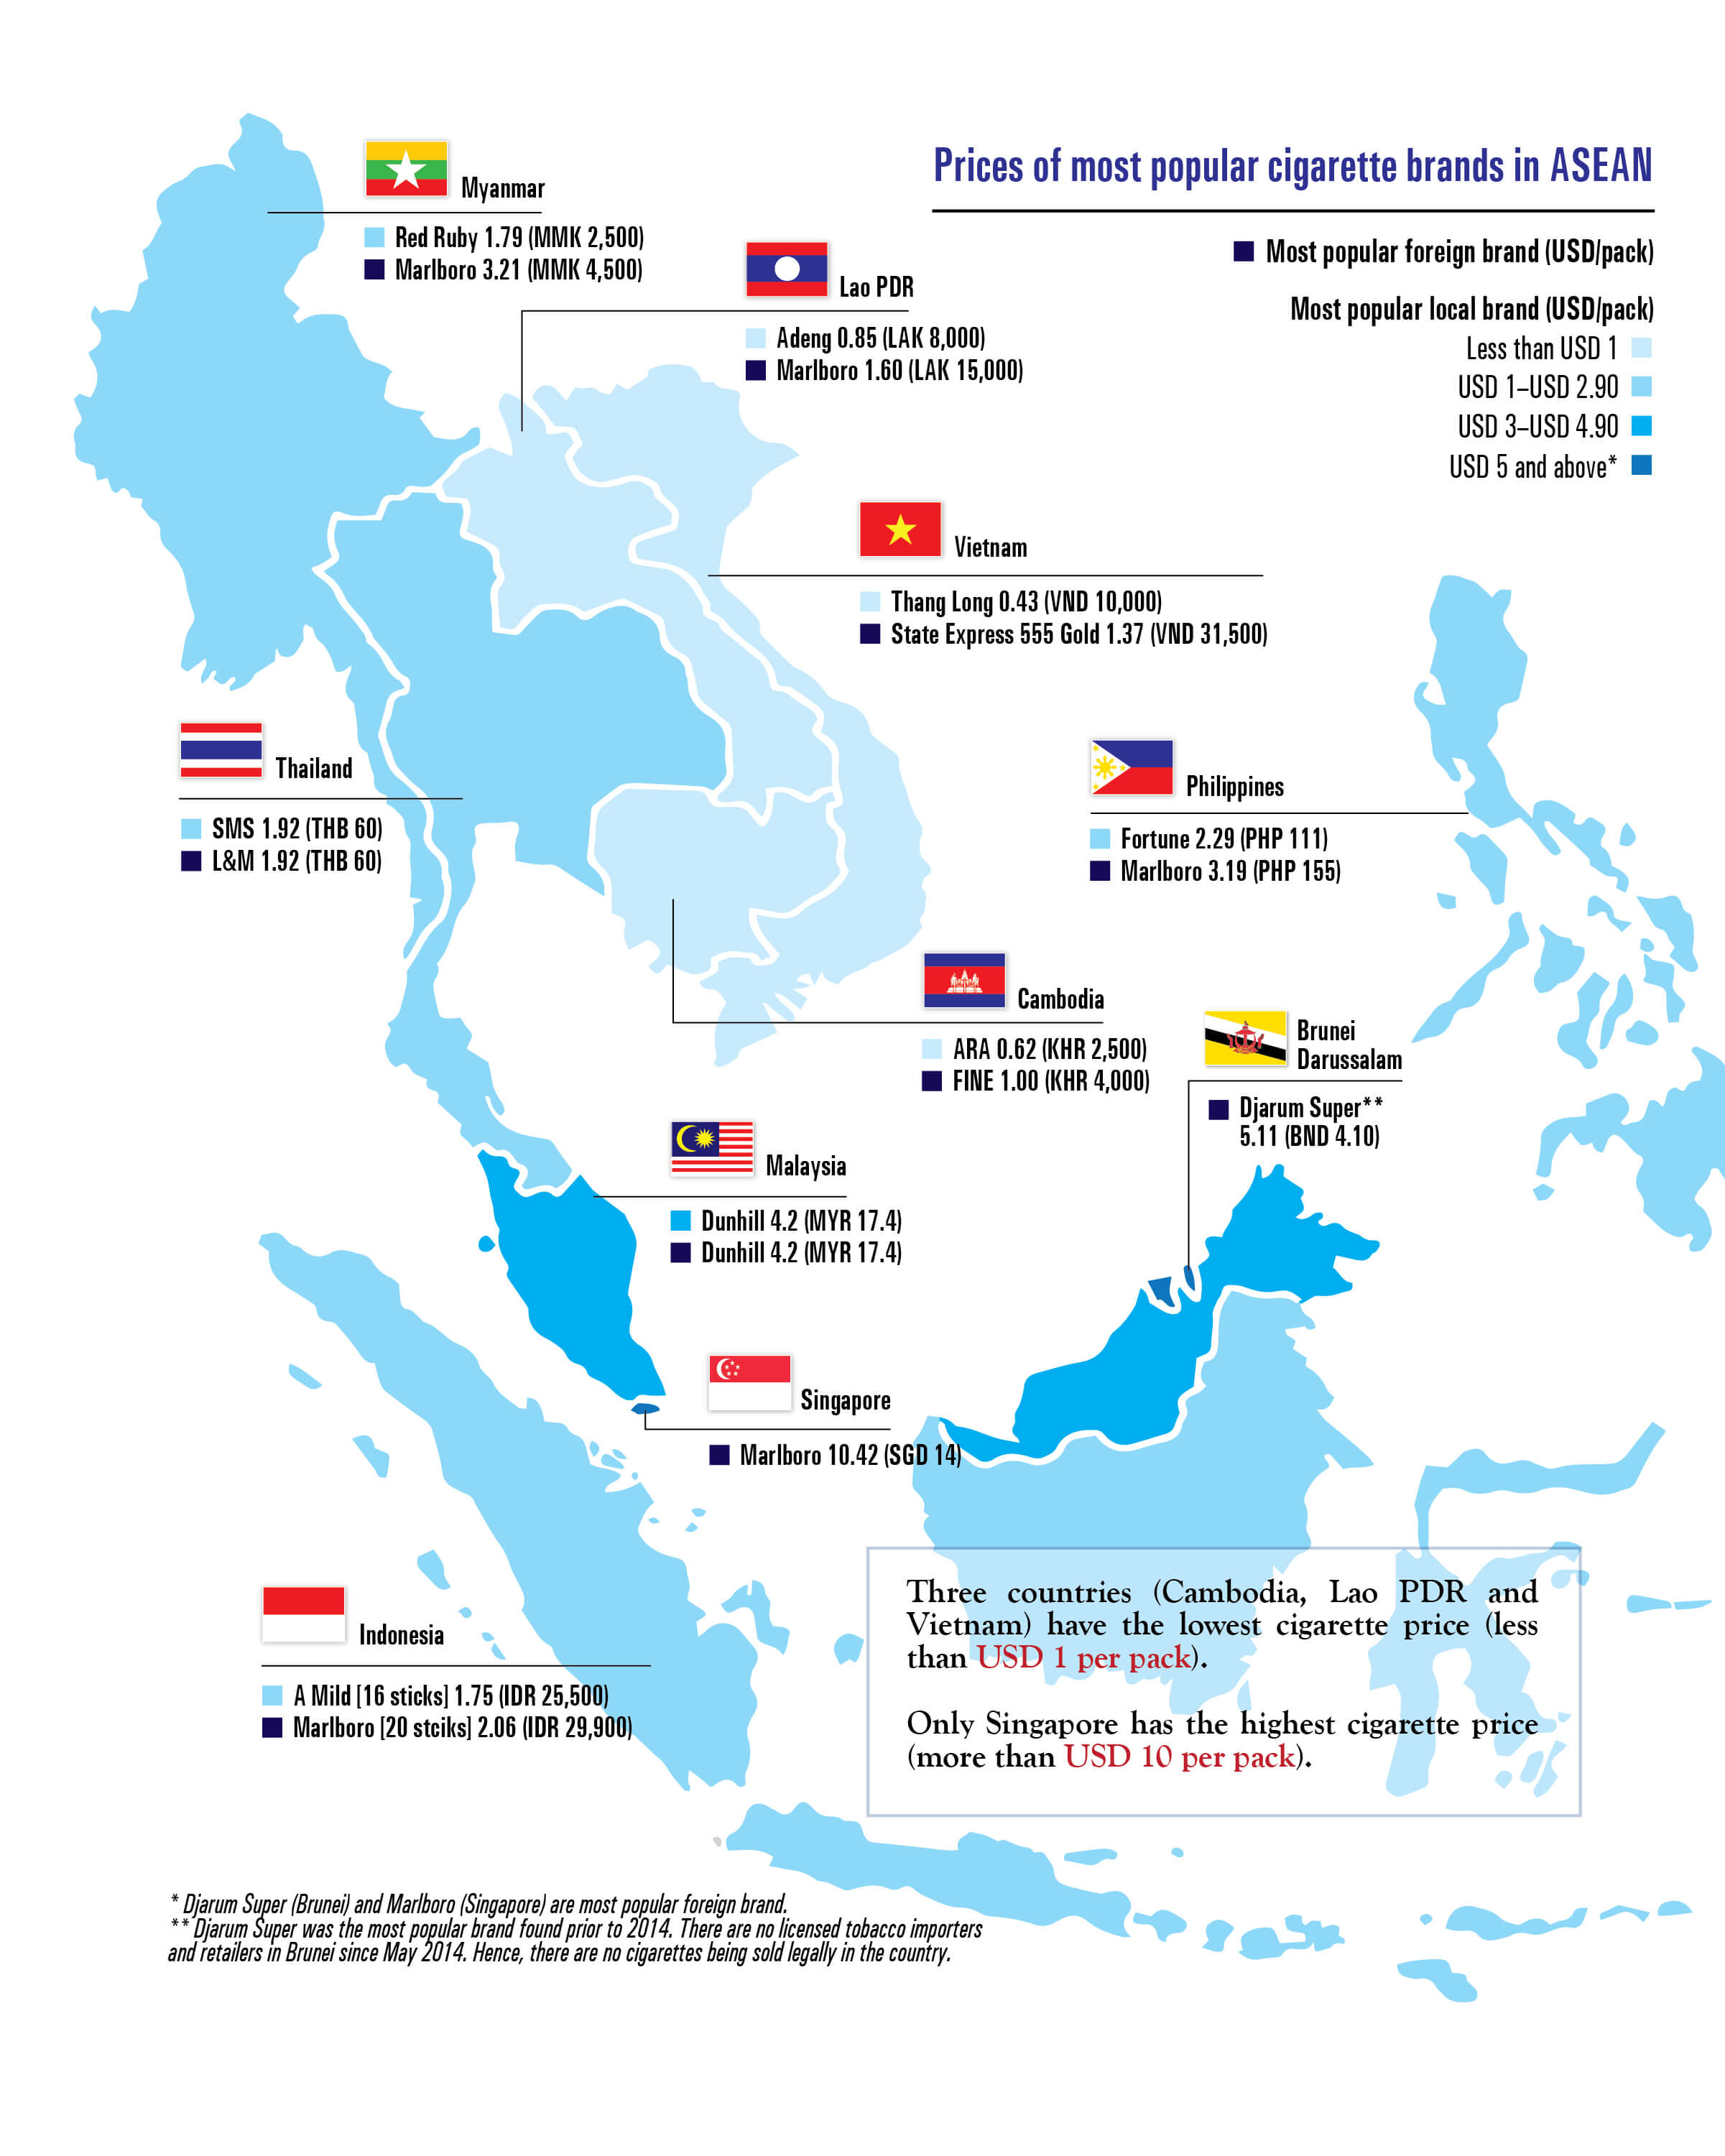 Prices of most popular cigarette brands in ASEAN